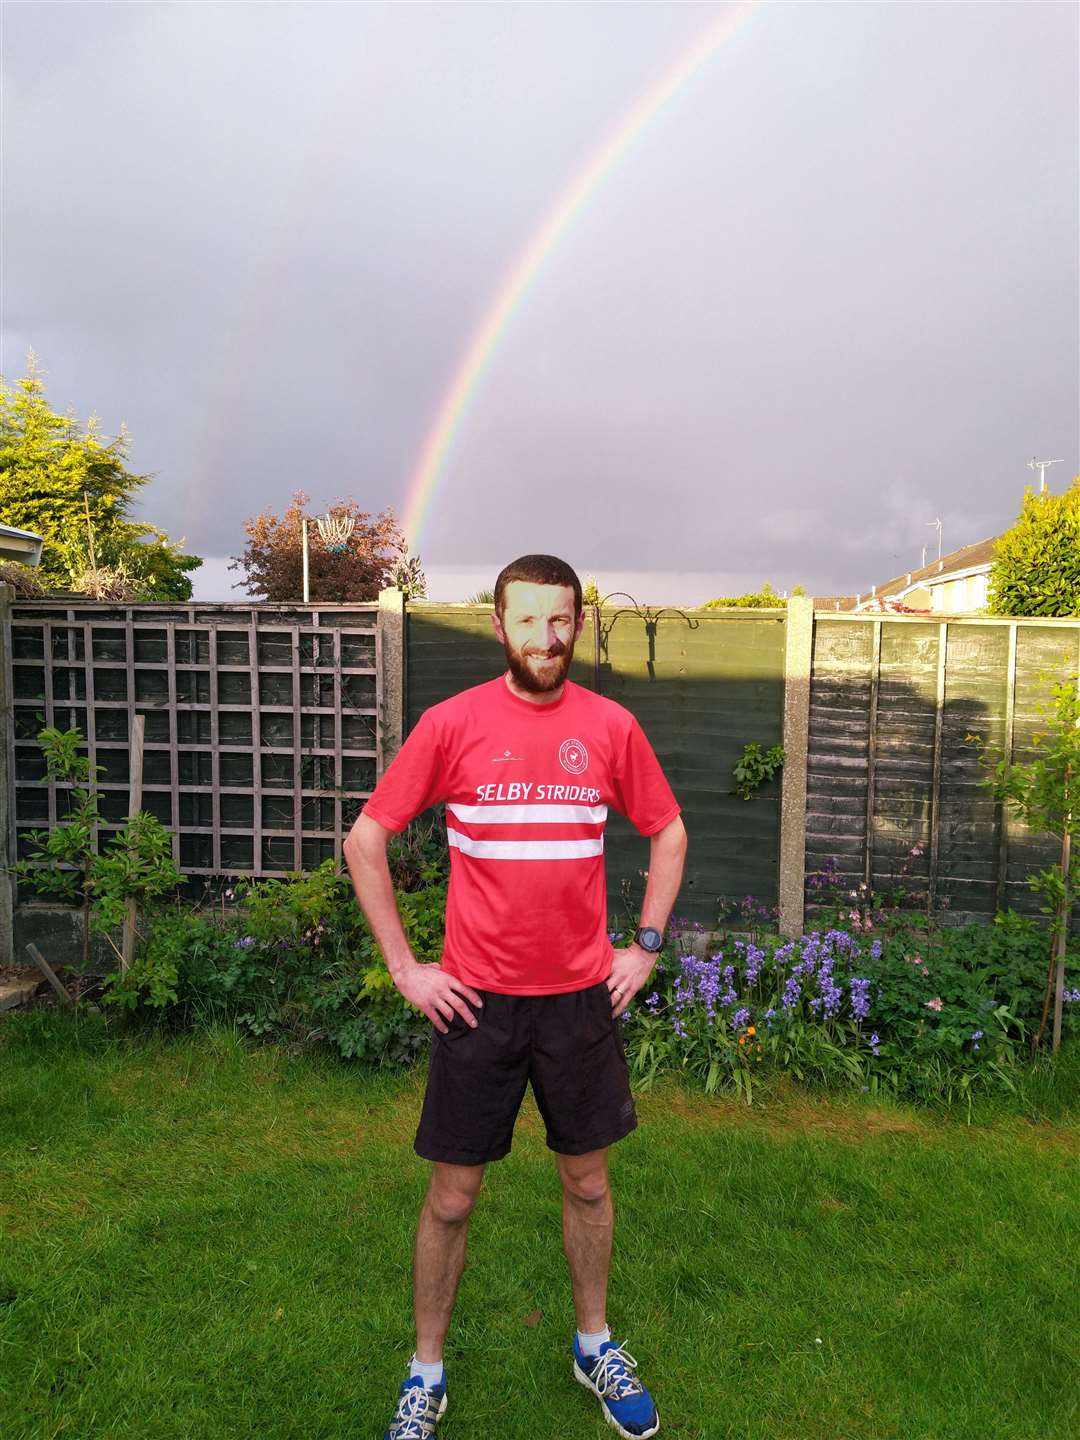 MARATHON MAN: Neil Musgrove putting his best foot forward for an ultra marathon in his back garden in Leeds. Picture: Neil Musgrove / Submitted by Leeds Cares